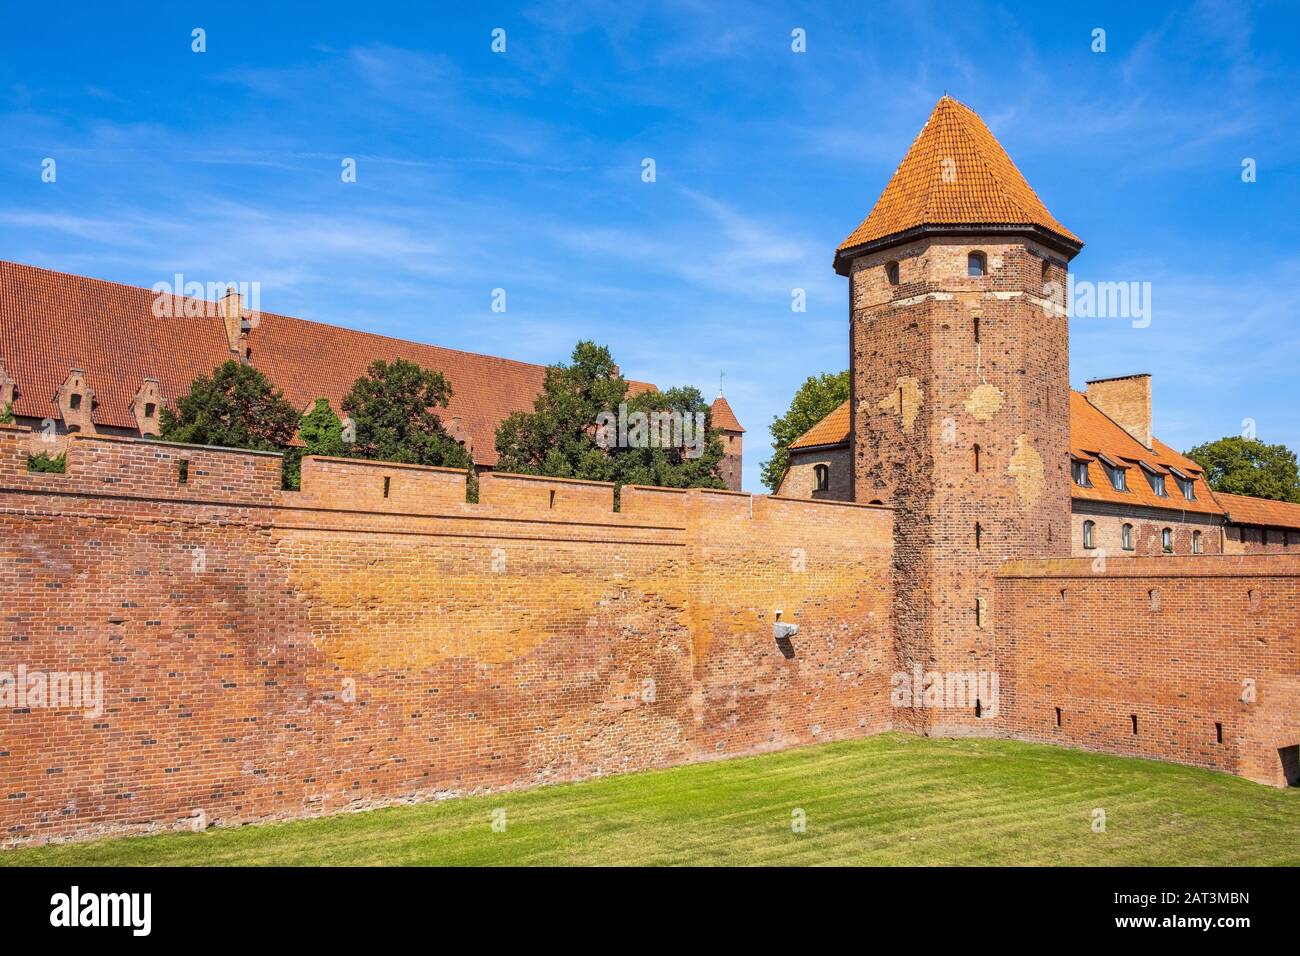 Malbork, Pomerania / Poland - 2019/08/24: Panoramic view of the medieval Teutonic Order Castle in Malbork, Poland - external defense walls, towers moat and keeps Stock Photo